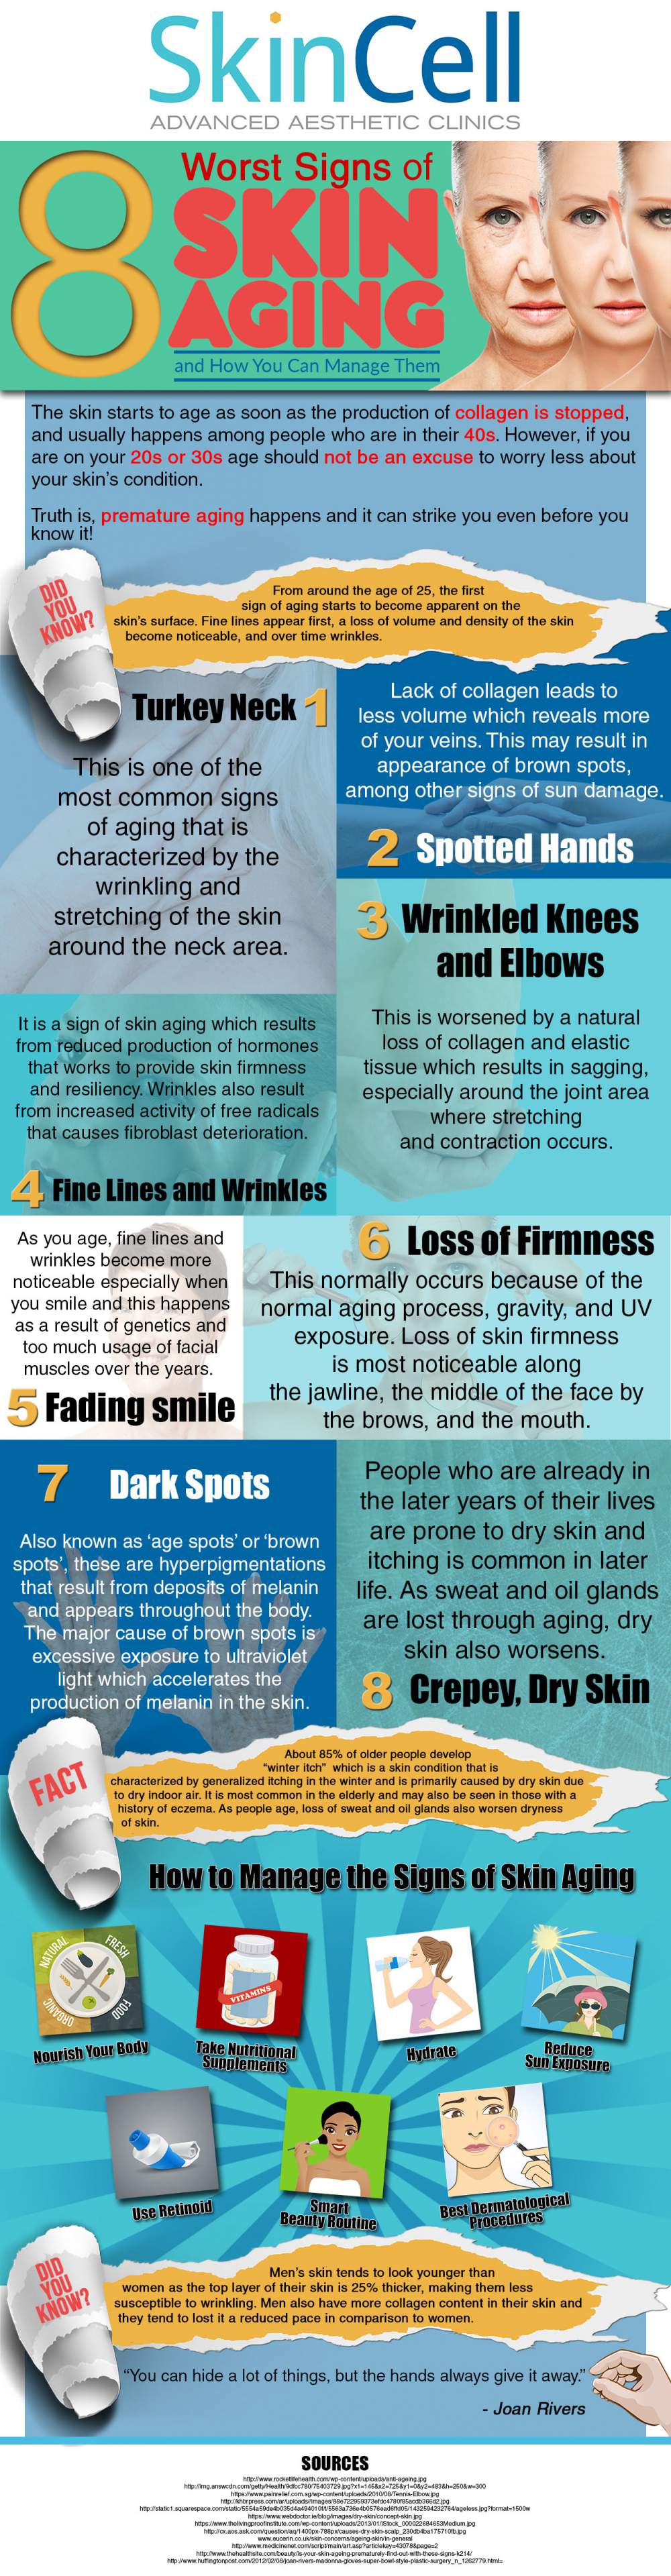 Signs of Skin Aging